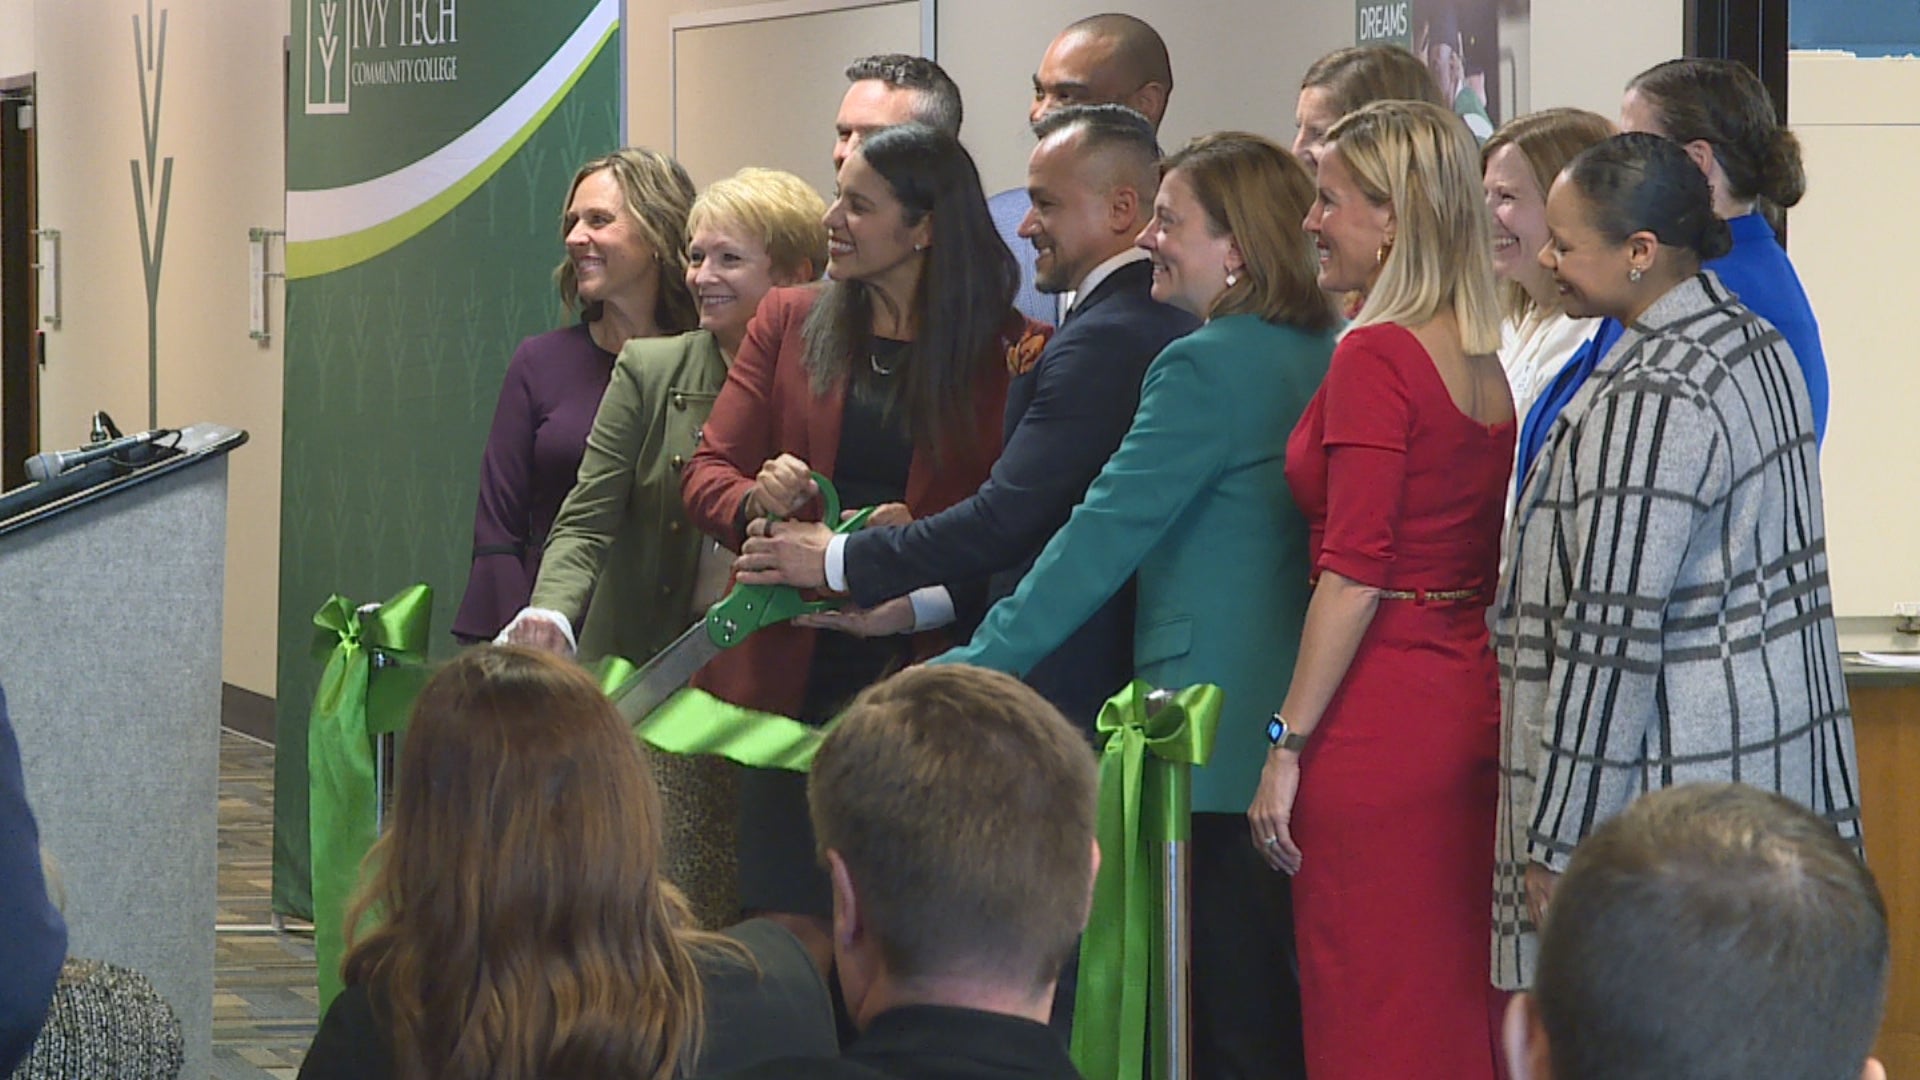 Ivy Tech unveils new Biopharma Science & Technology Lab in Indianapolis – Latest News, Weather, and Traffic in Indiana